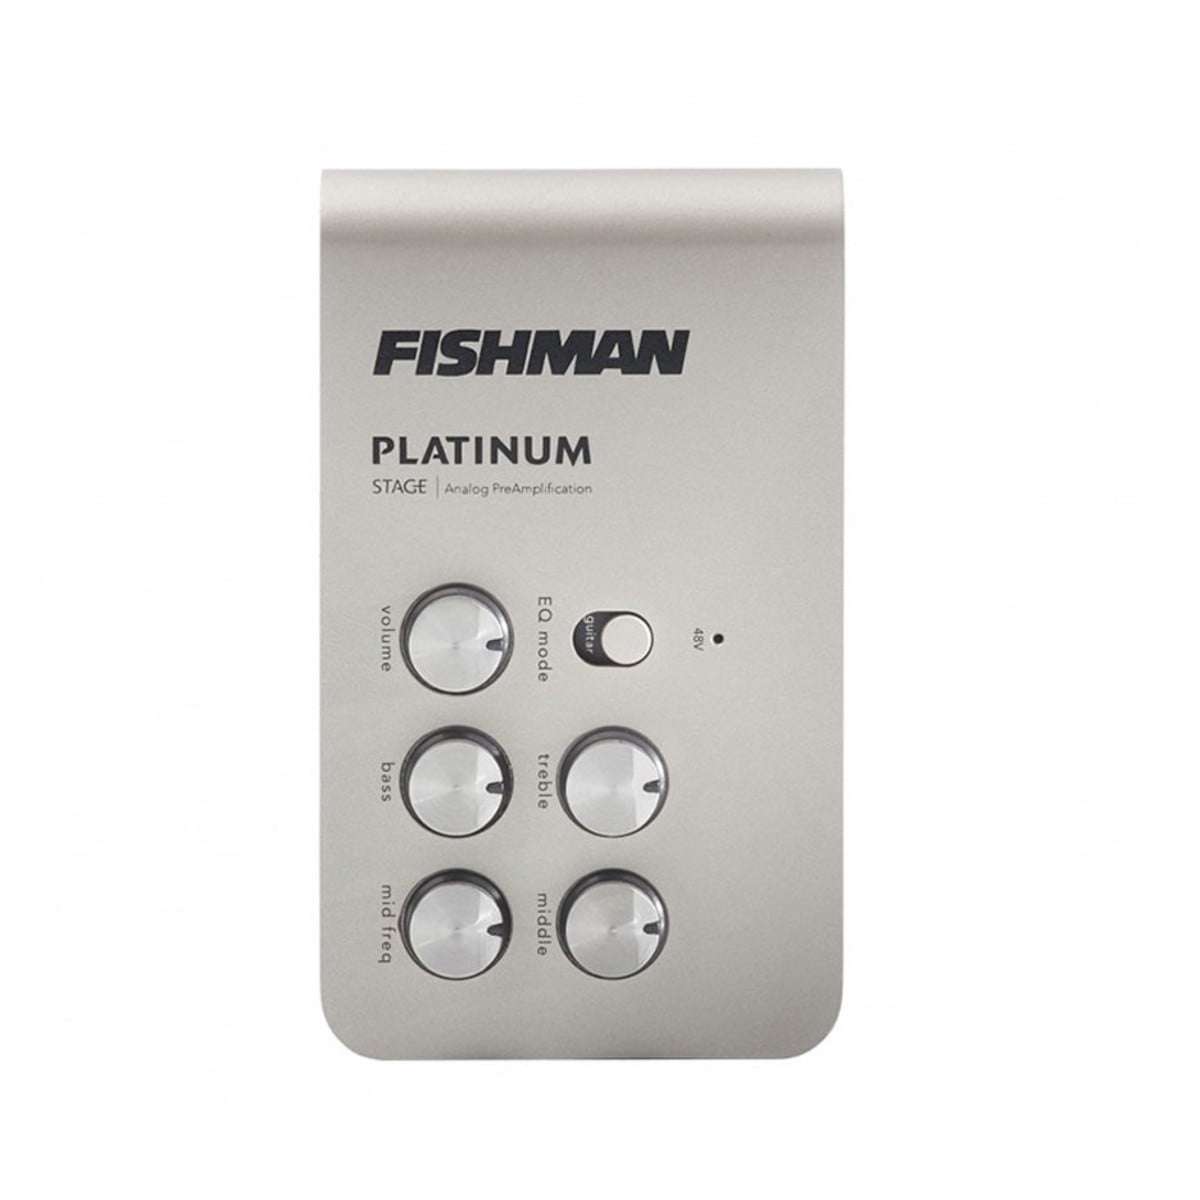 Fishman Platinum Stage EQ/DI Analog Preamp - New Fishman       Volume Preamp     EQ   Distortion    Boost Bass Analogue Acoustic Guitar Guitar Effect Pedal